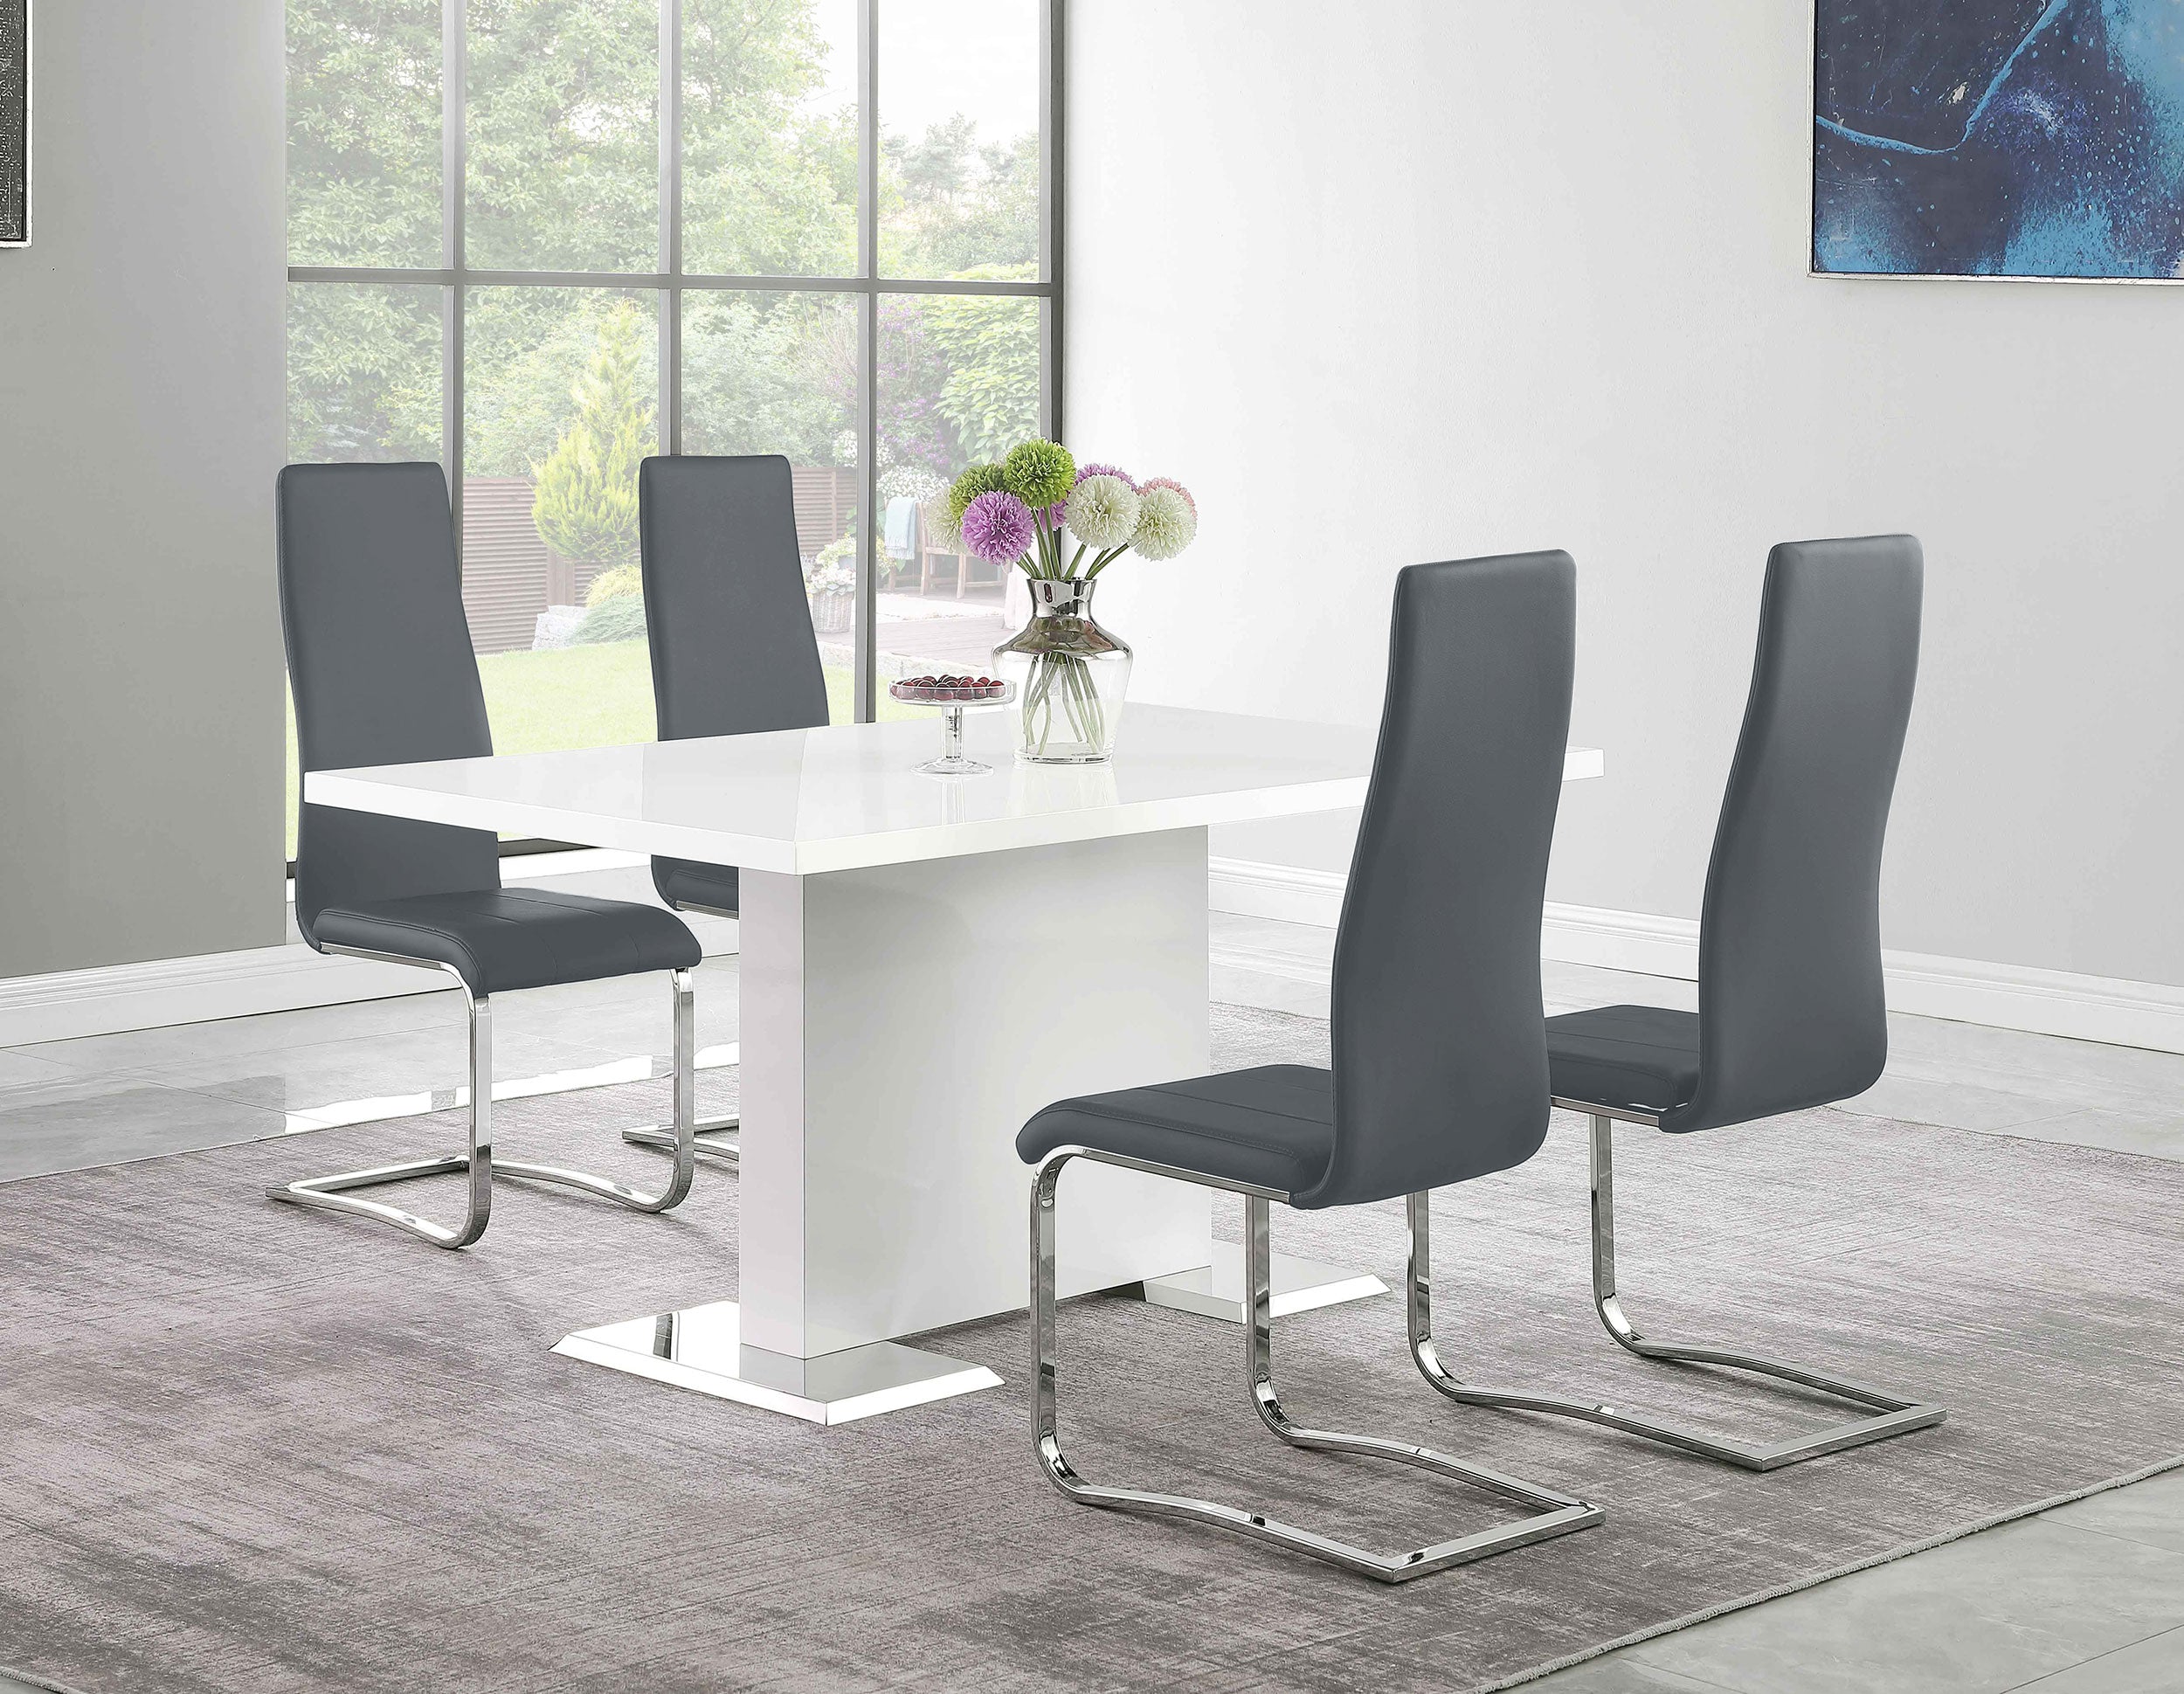 5 PC Contemporary High Gloss White Dining Room Set Gray Leatheratte Chairs